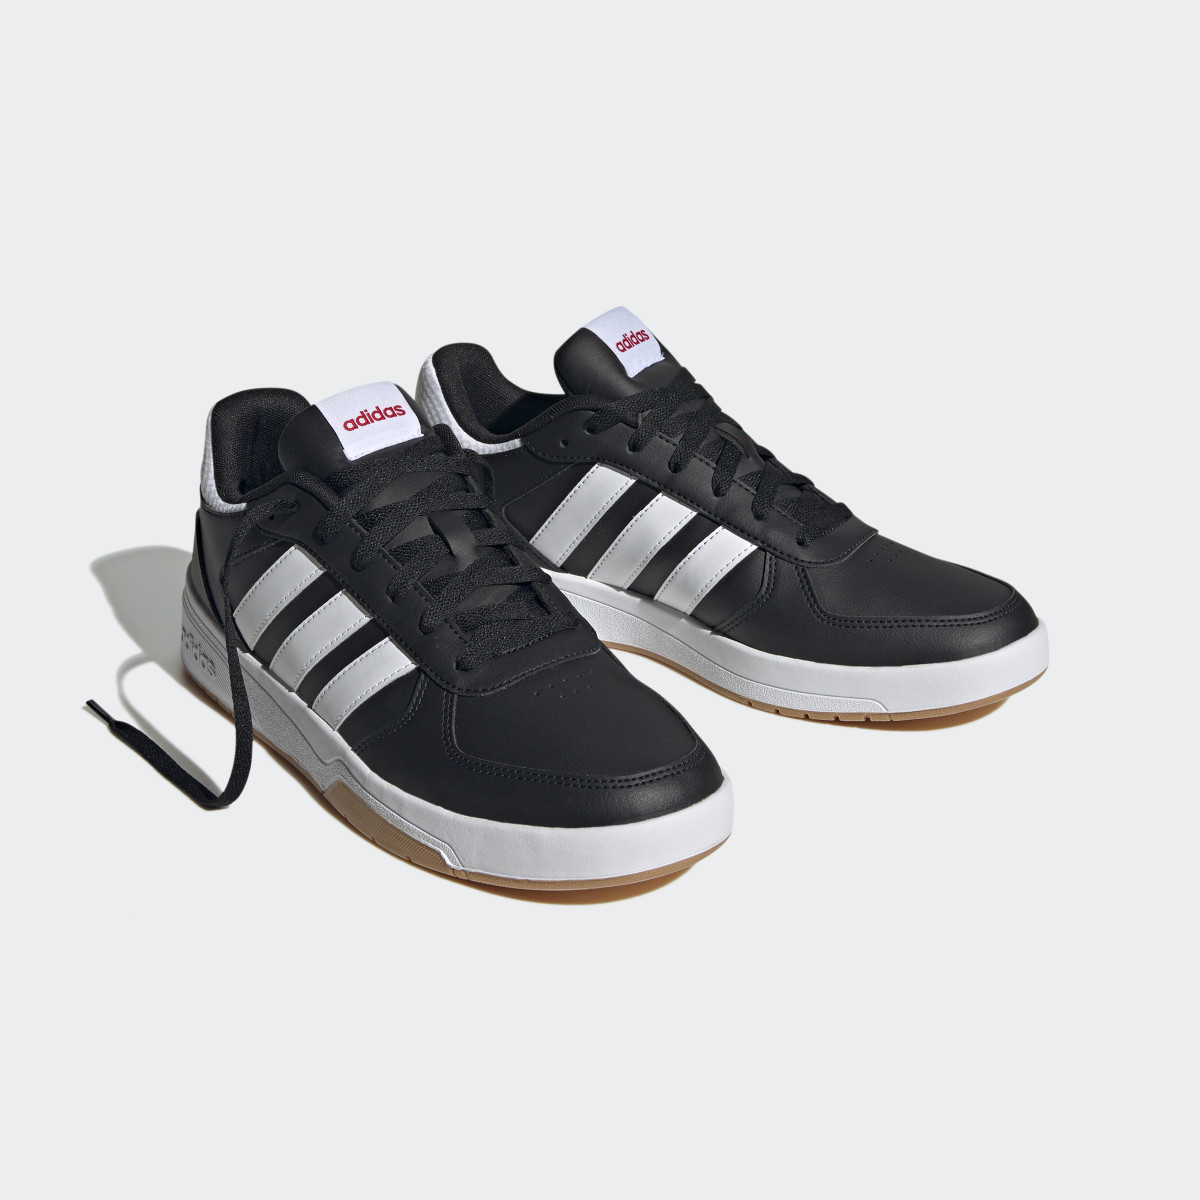 Adidas Chaussure CourtBeat Court Lifestyle. 8